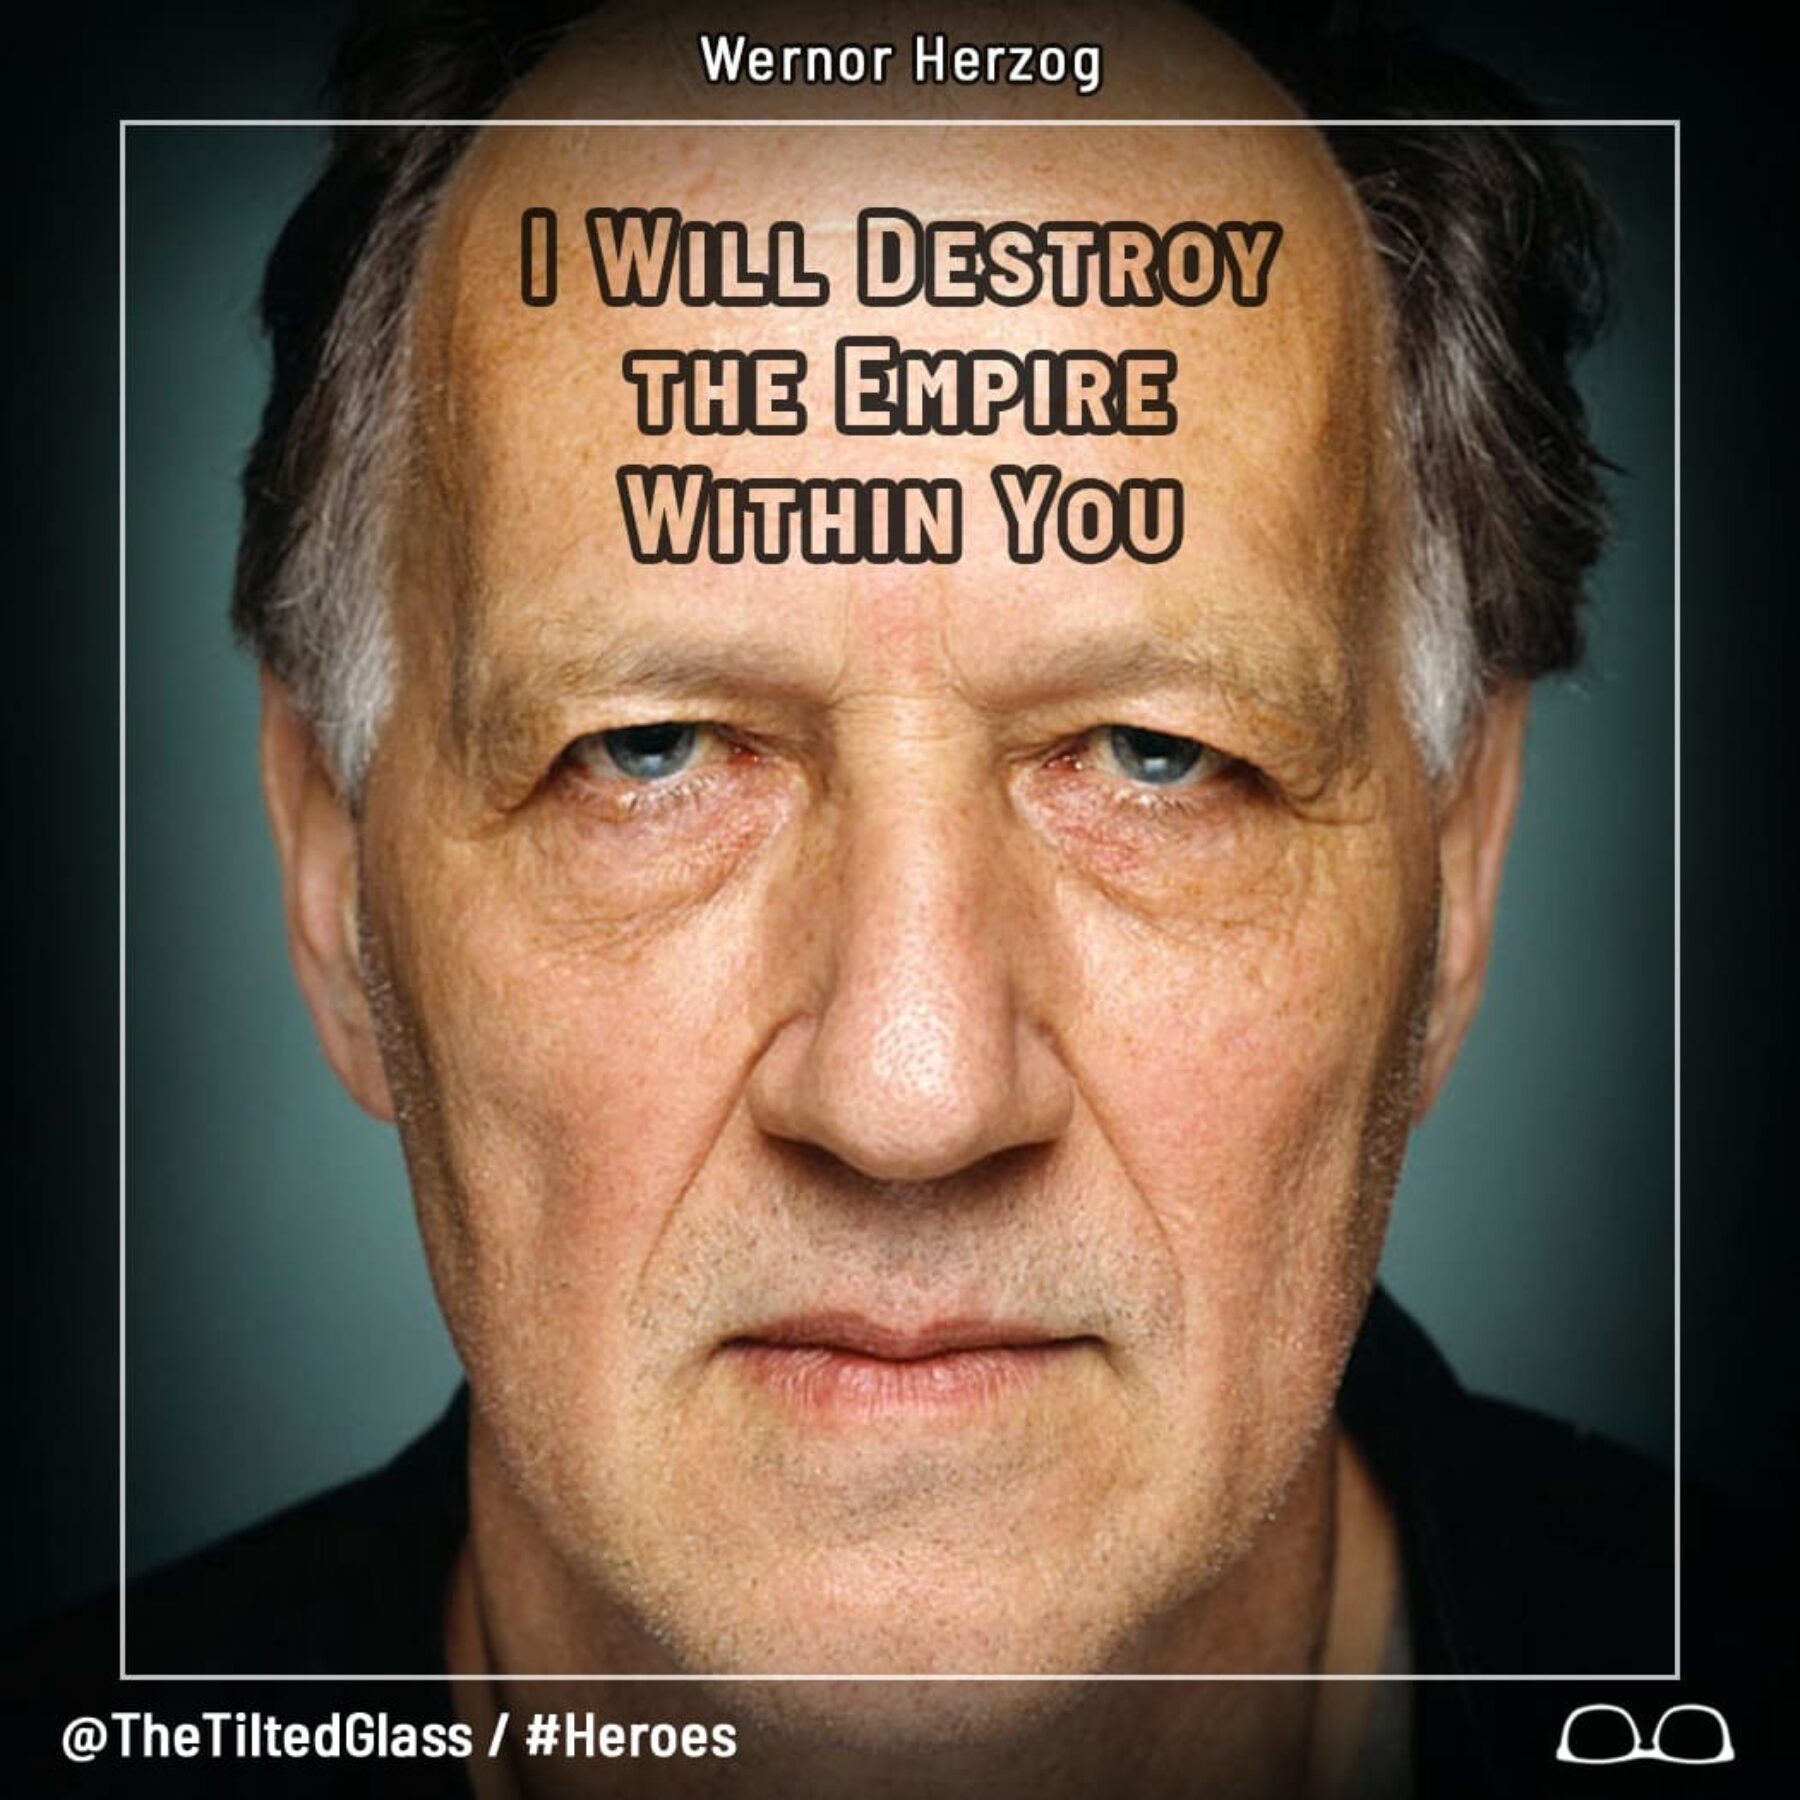 Werner Herzog: I Will Destroy the Empire Within You